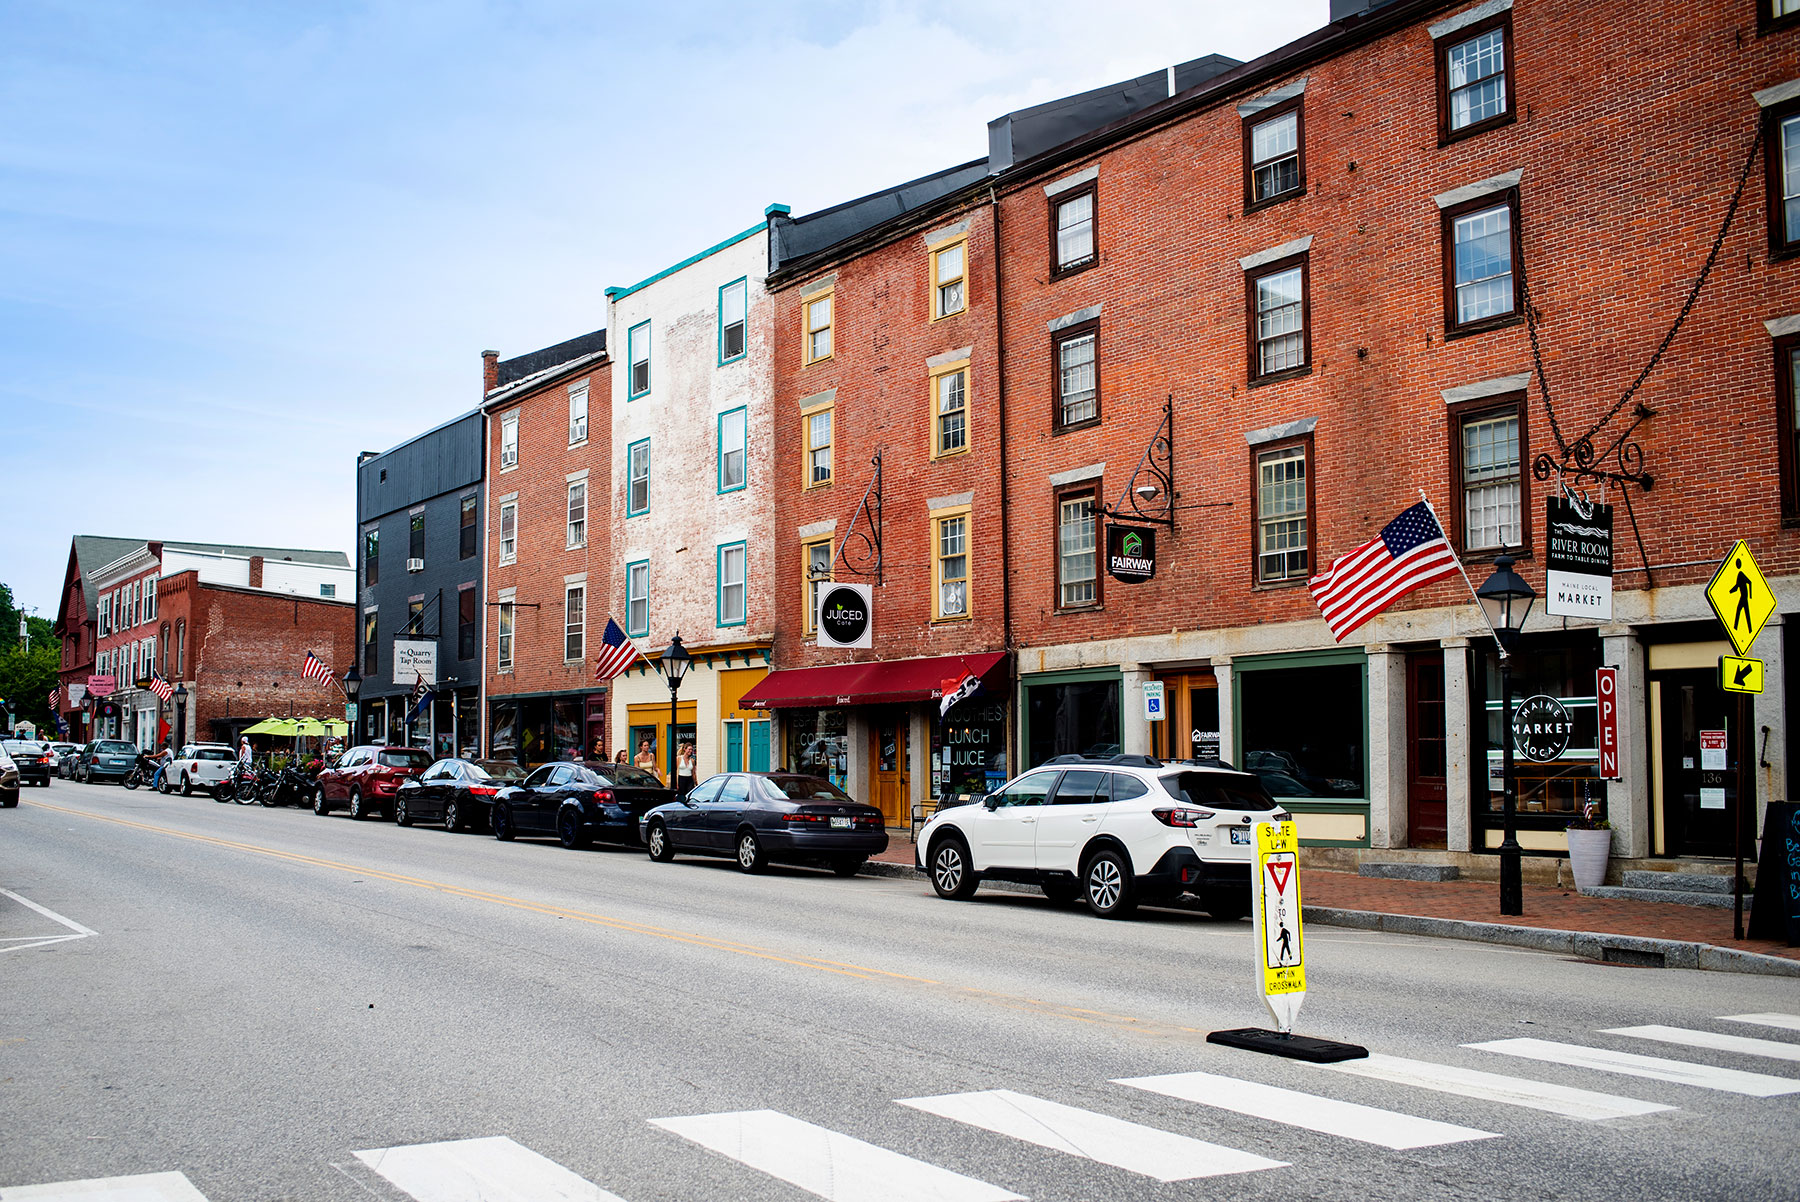 Shopping along Water Street in Hallowell